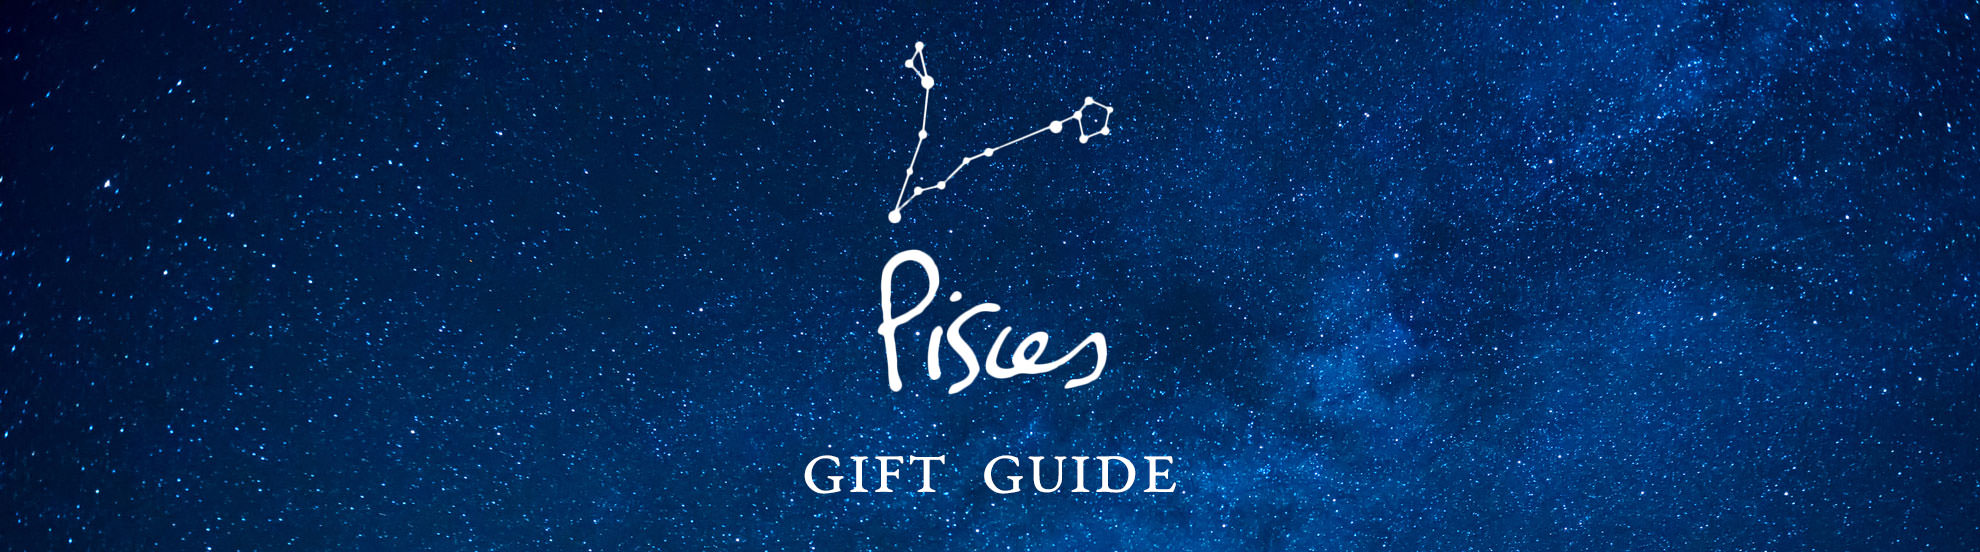 Pisces Gift Guide